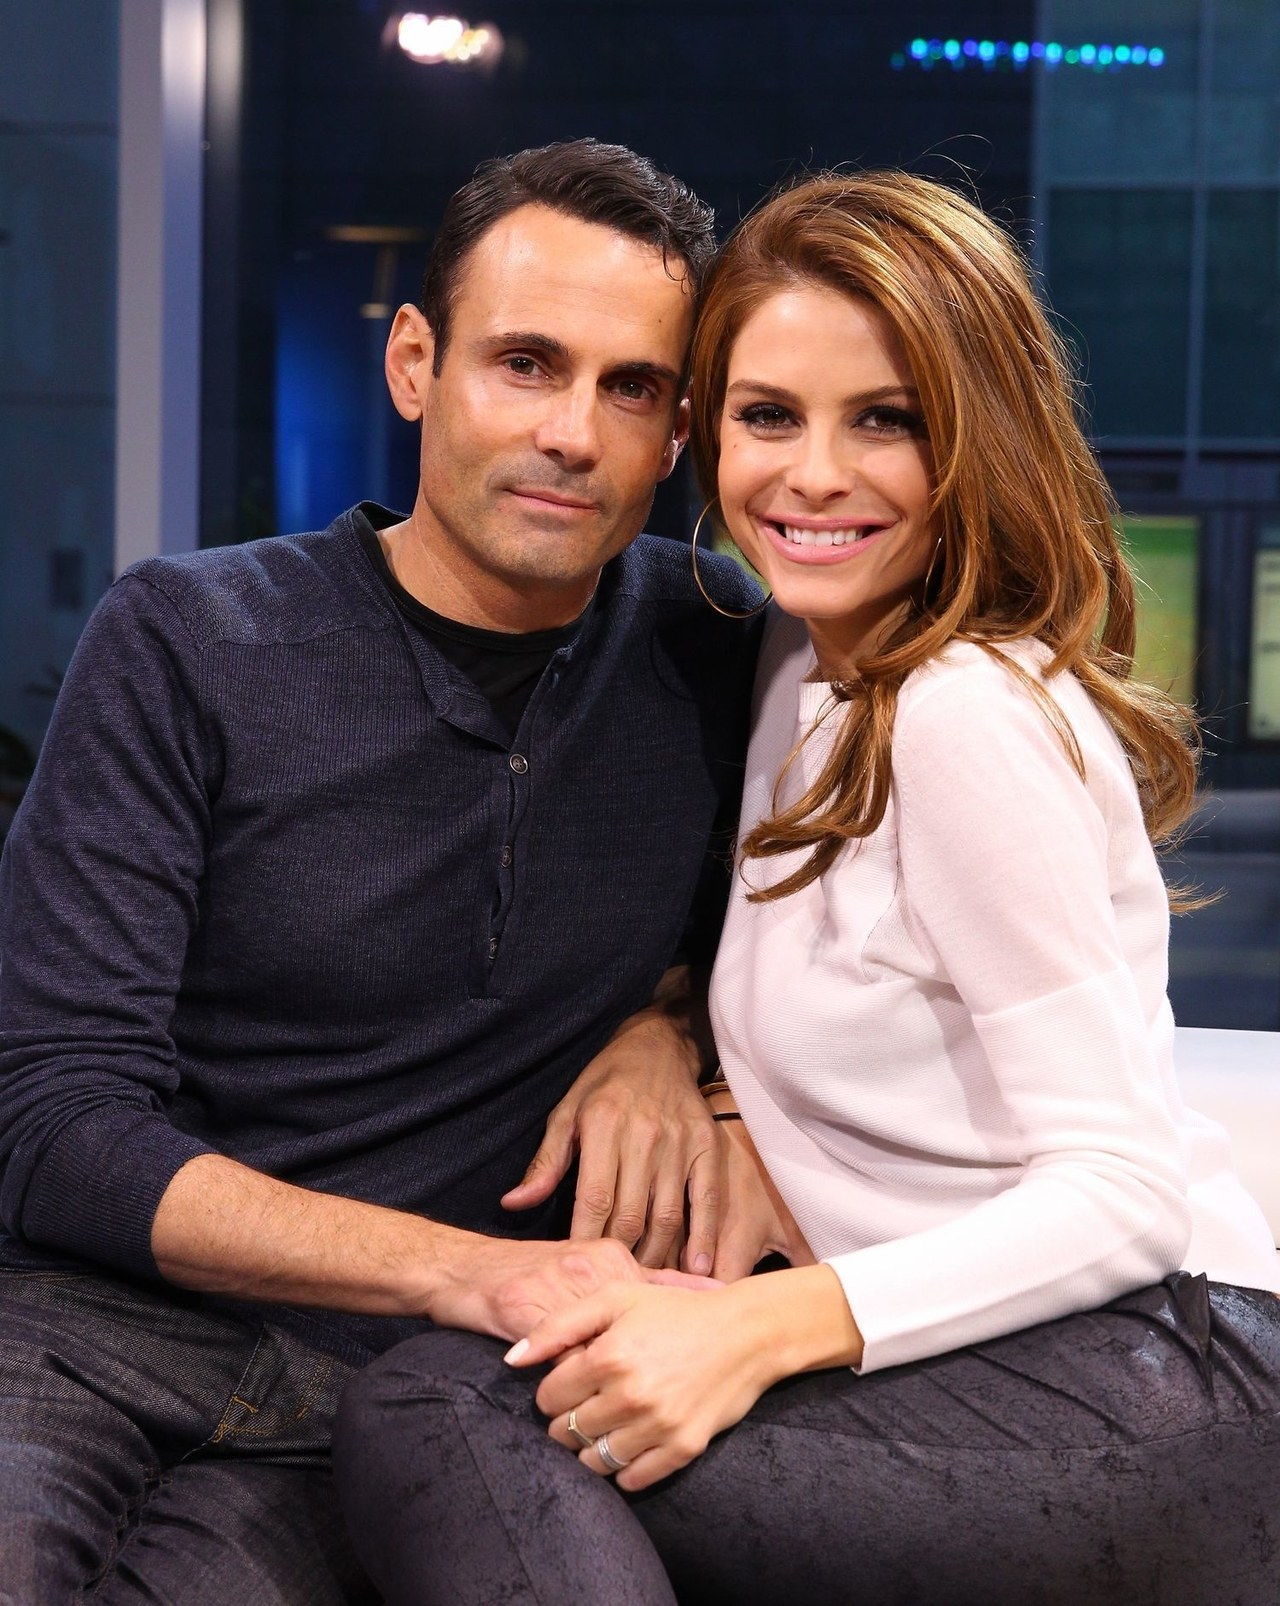 01 Maria Menounos engagement ring 0312 getty